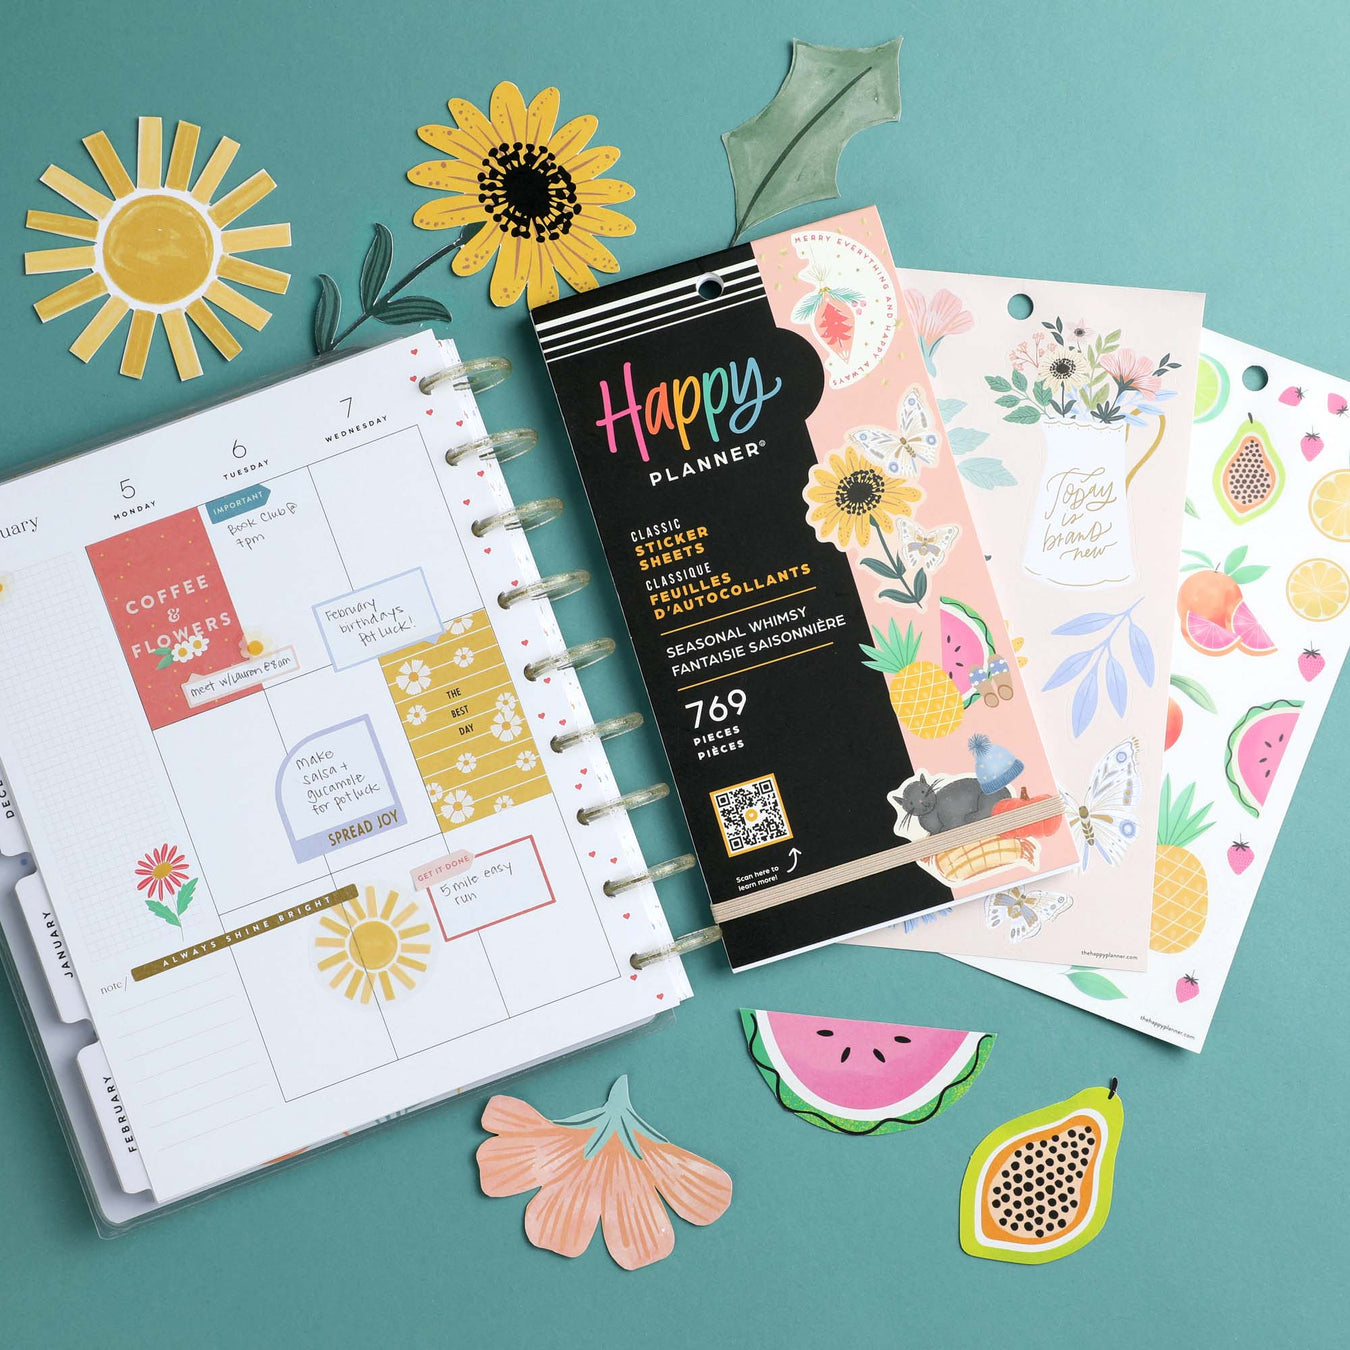 The Happy Planner — WashiGang